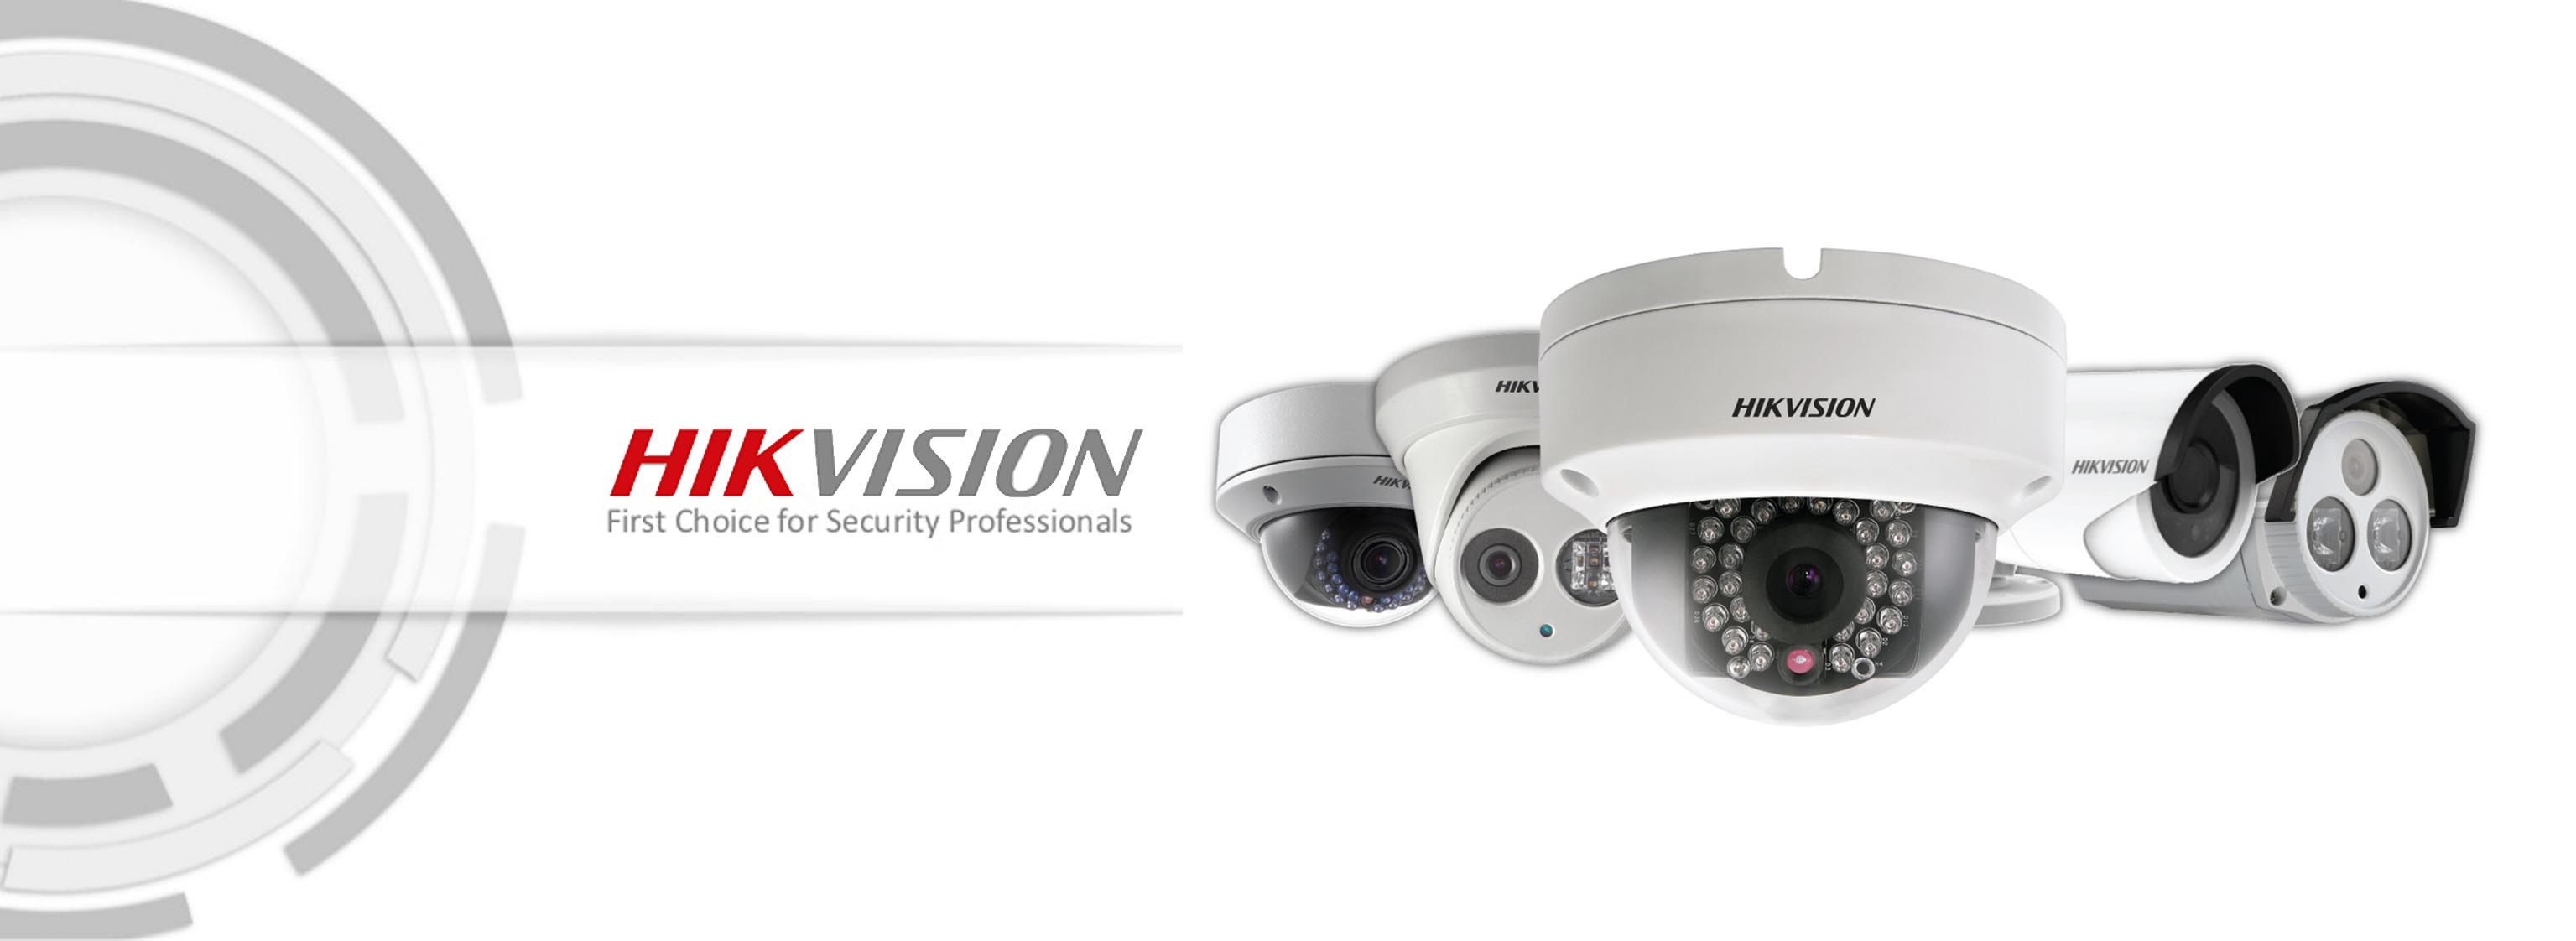 hikvision special camera price list in fbd